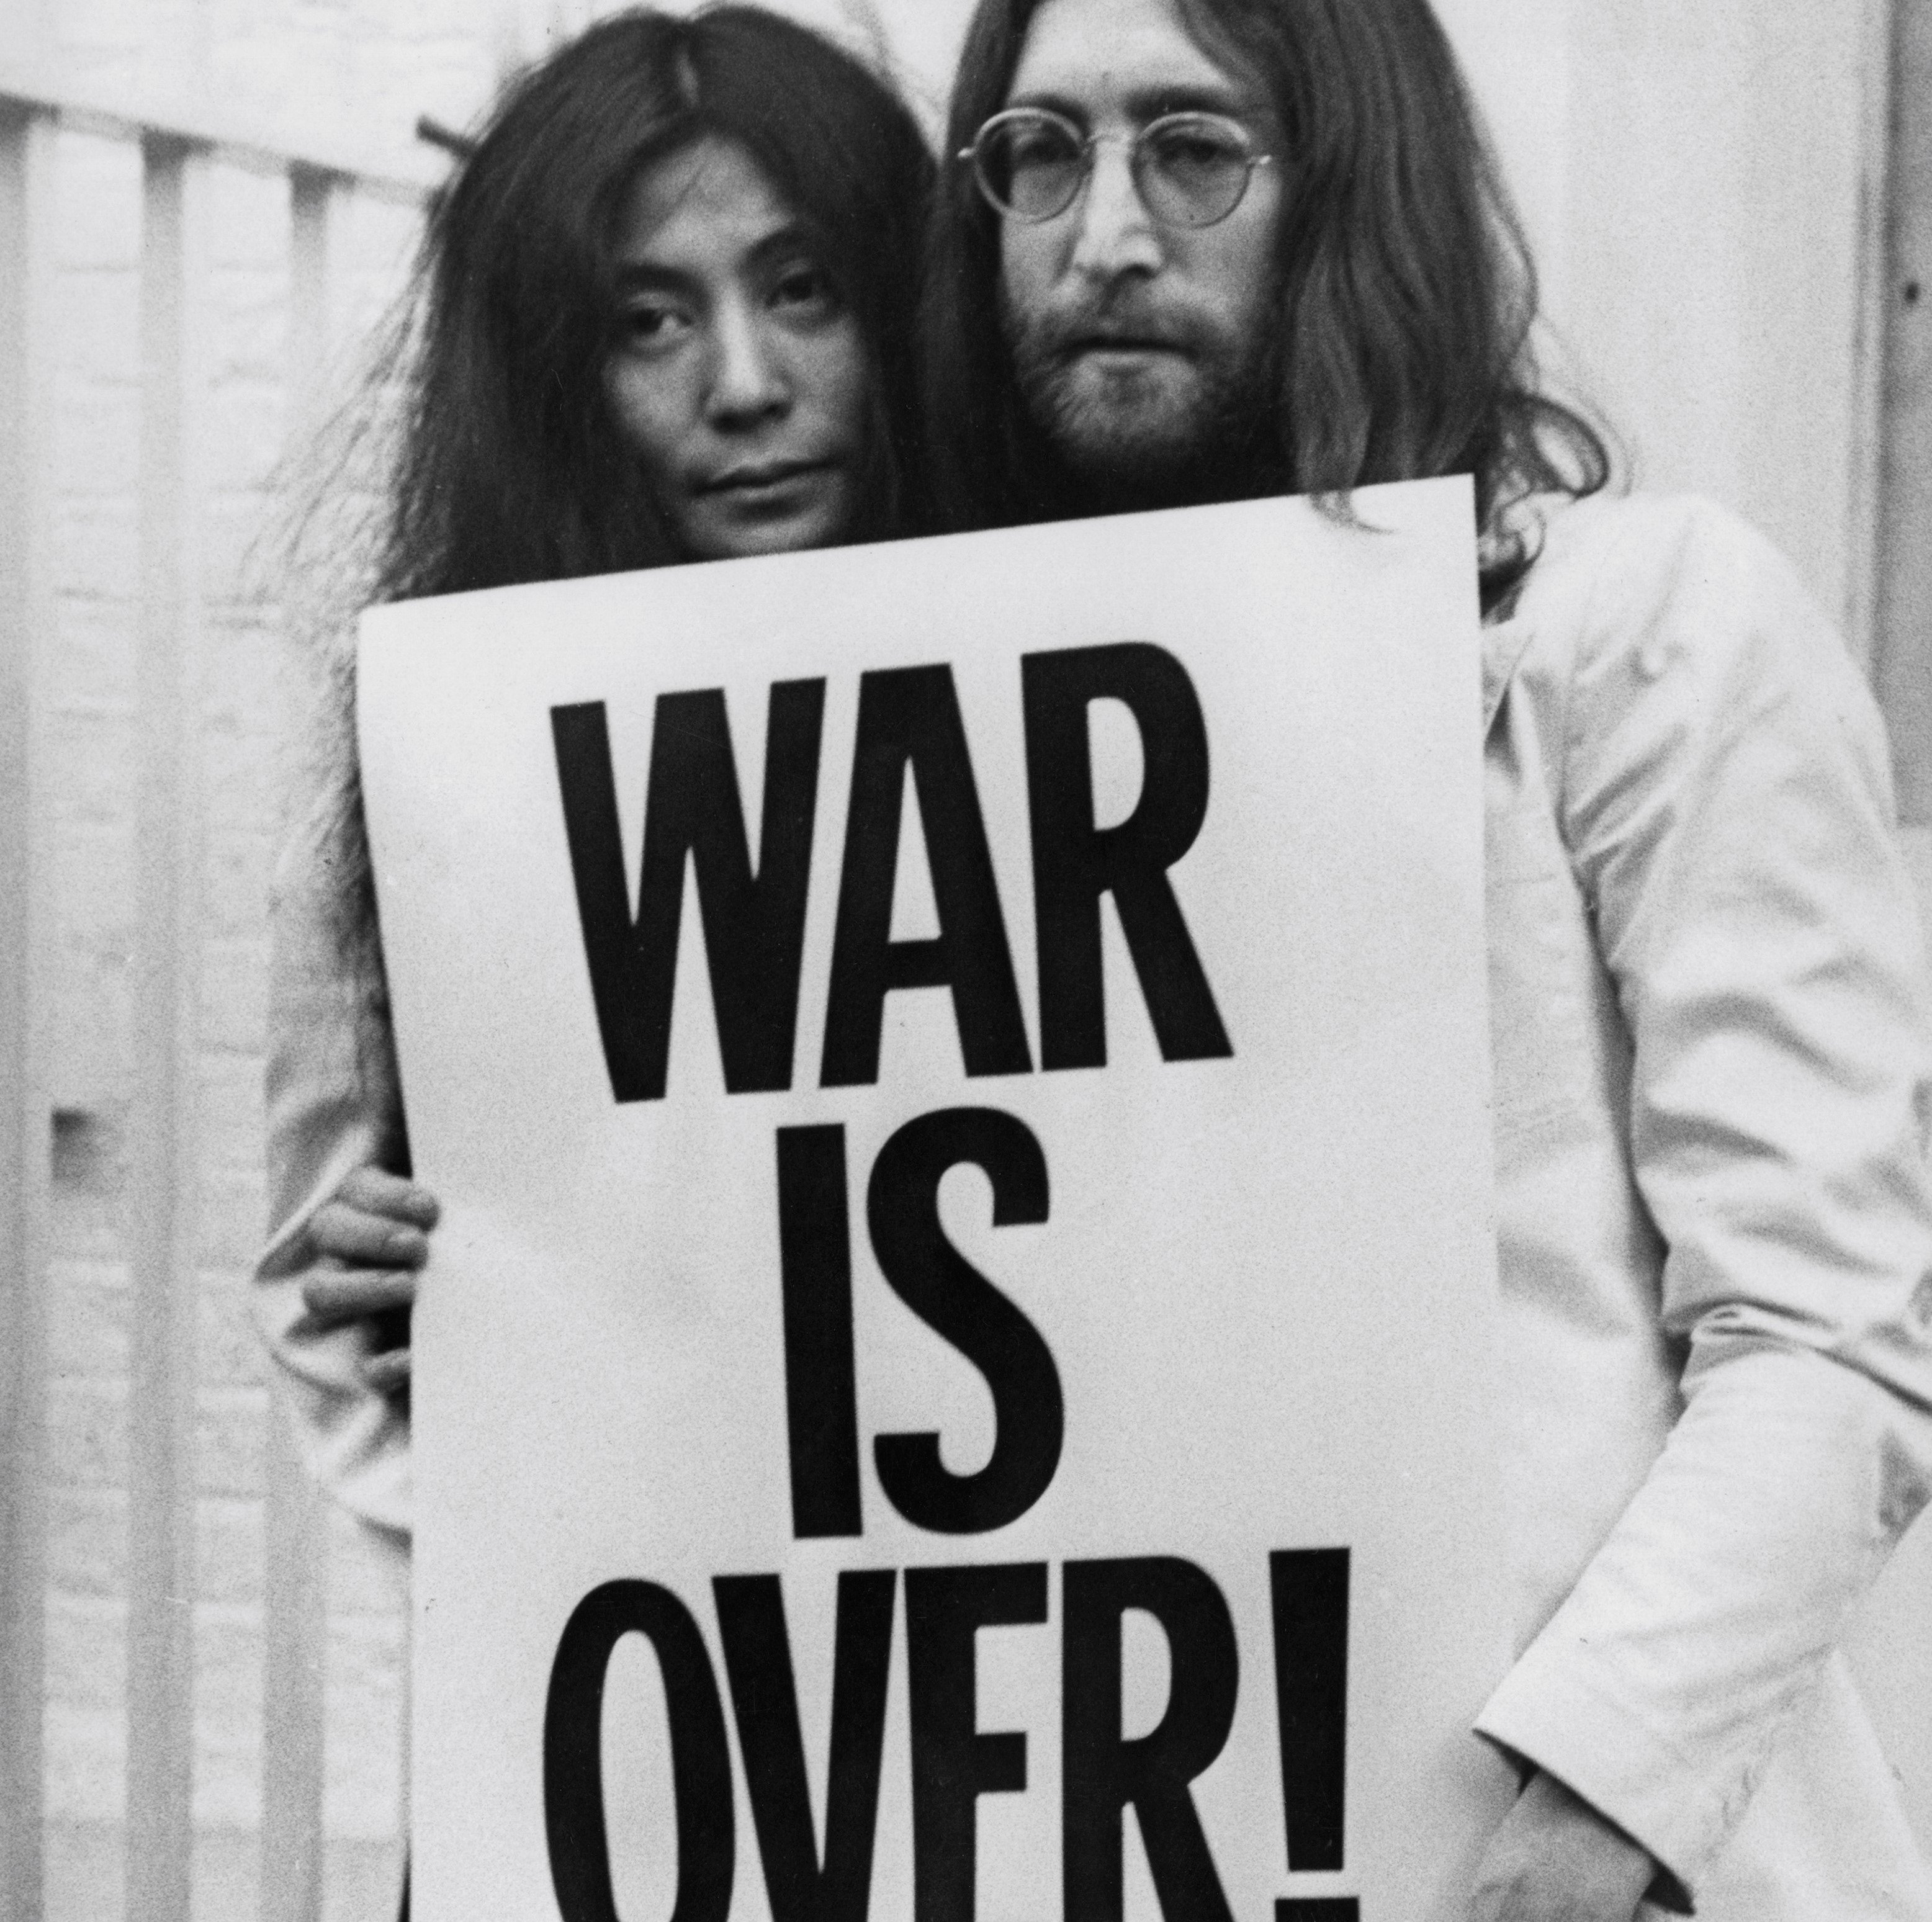 Yoko Ono and John Lennon with a 'War Is Over" sign